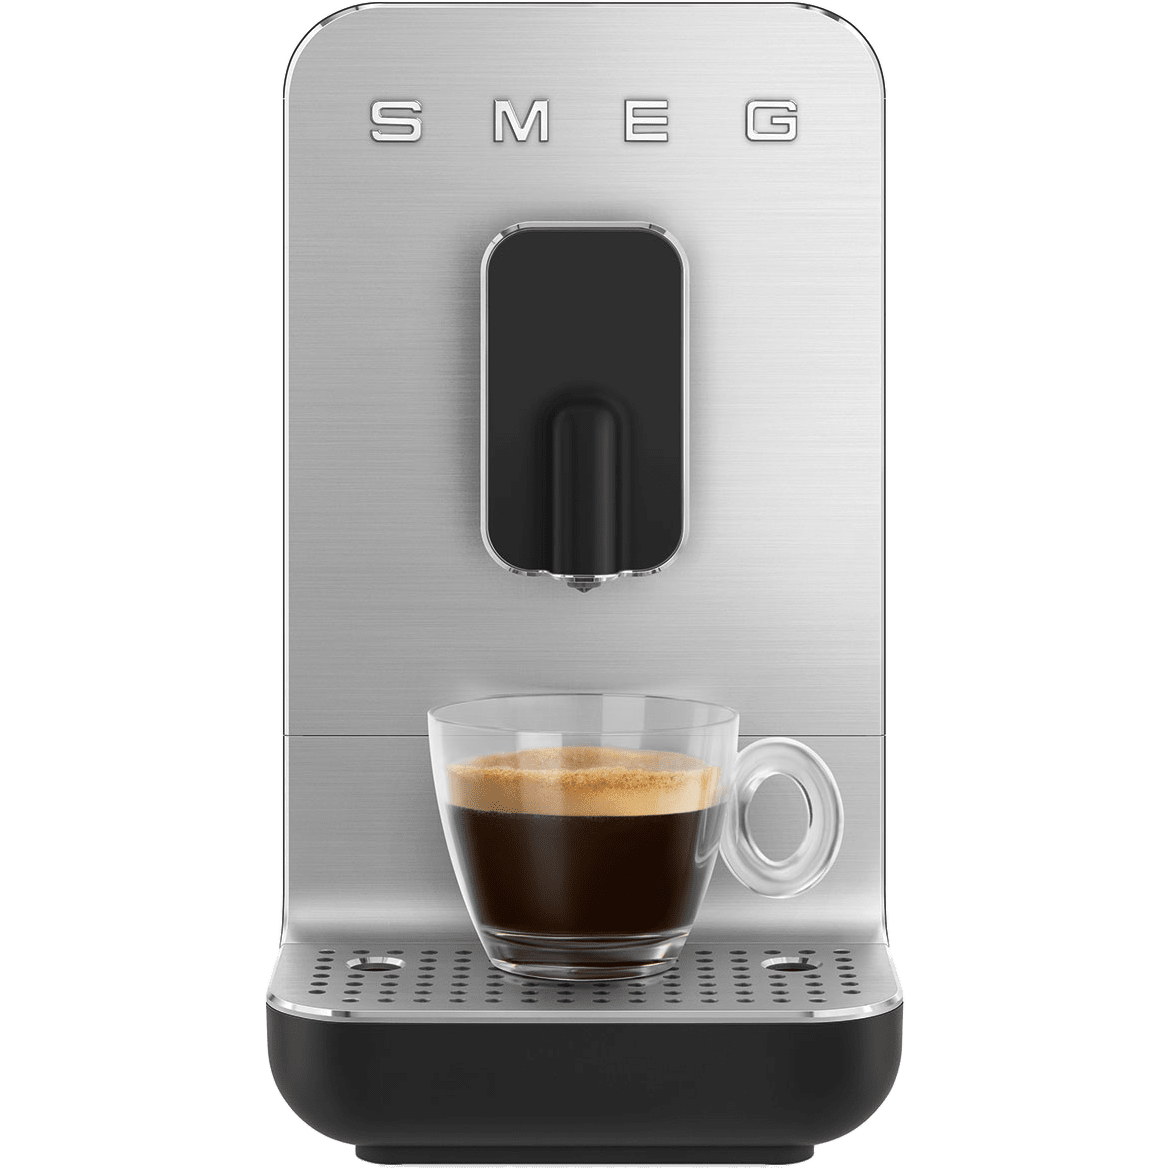 https://s3-assets.quenchessentials.com/media/images/products/smeg-fully-automatic-coffee-machine-black-main.png